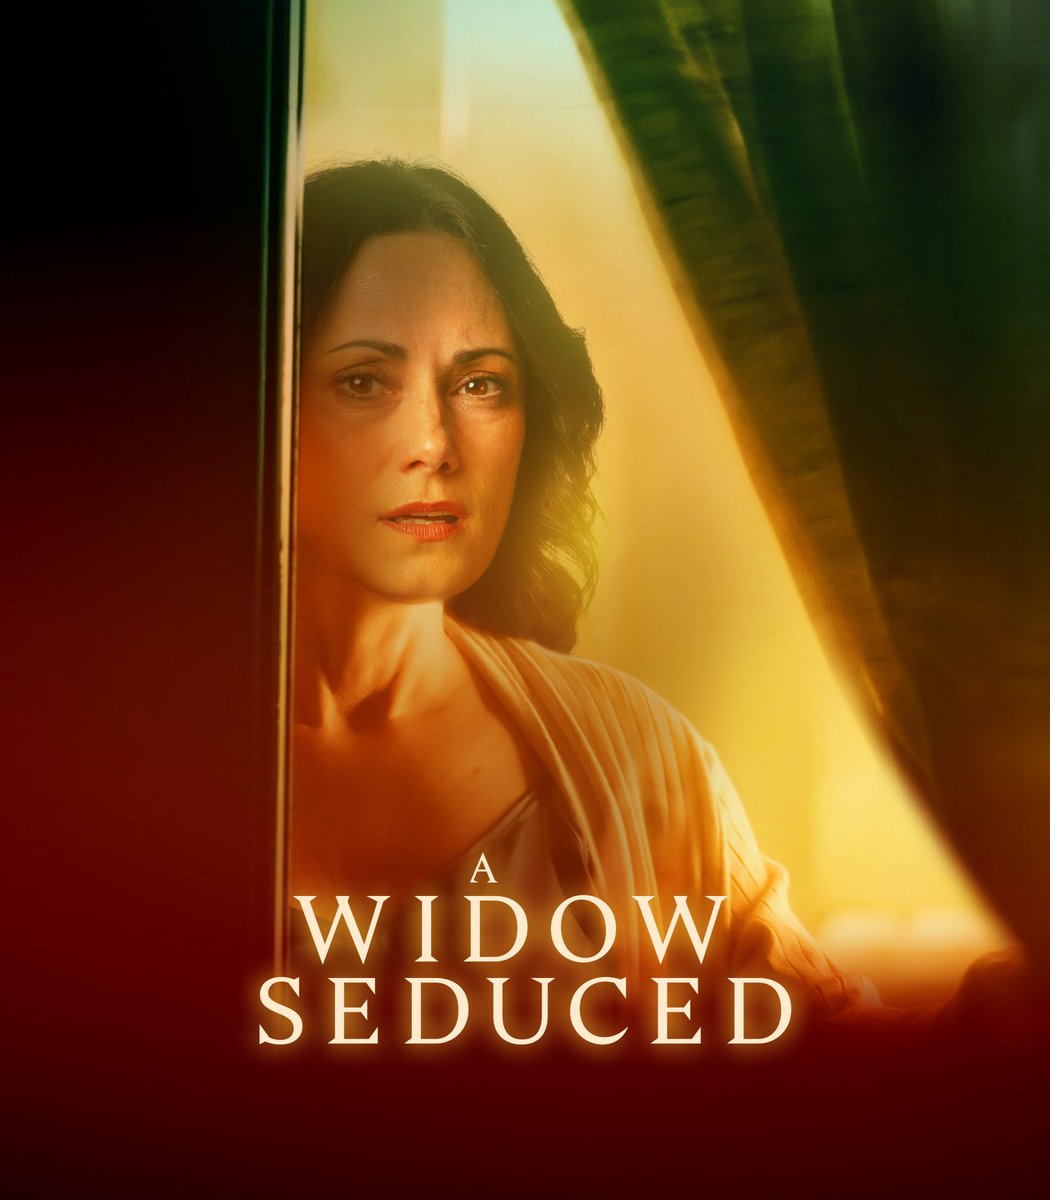 Vortex is proud to announce “A WIDOW SEDUCED” will premiere in 🇨🇦 on Feb 3rd on Super Channel. A career-driven widow falls for a charming businessman that she meets online, only to discover that her new beau has a deadly secret. Available in the USA 🇺🇸 on Feb 4th on #Lifetime.